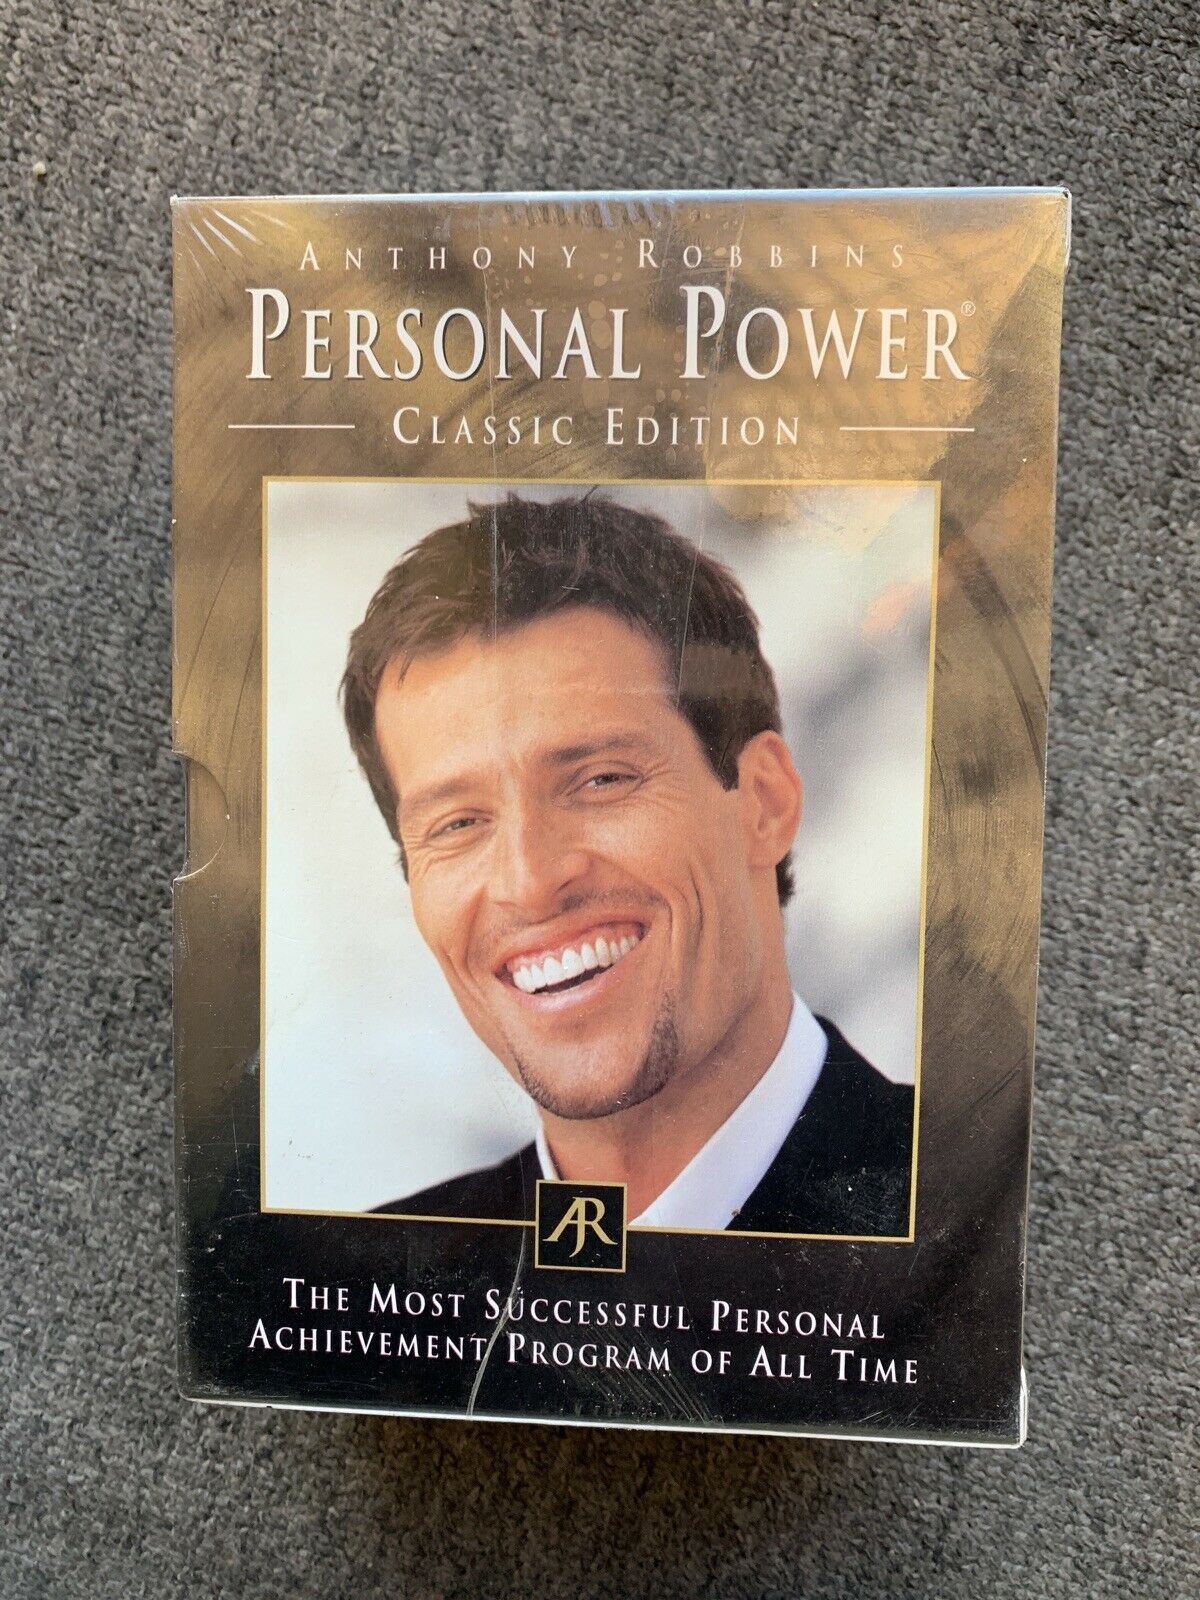 *New Sealed* Anthony Robbins - Personal Power - Classic Edition (Audio CD, 1996)